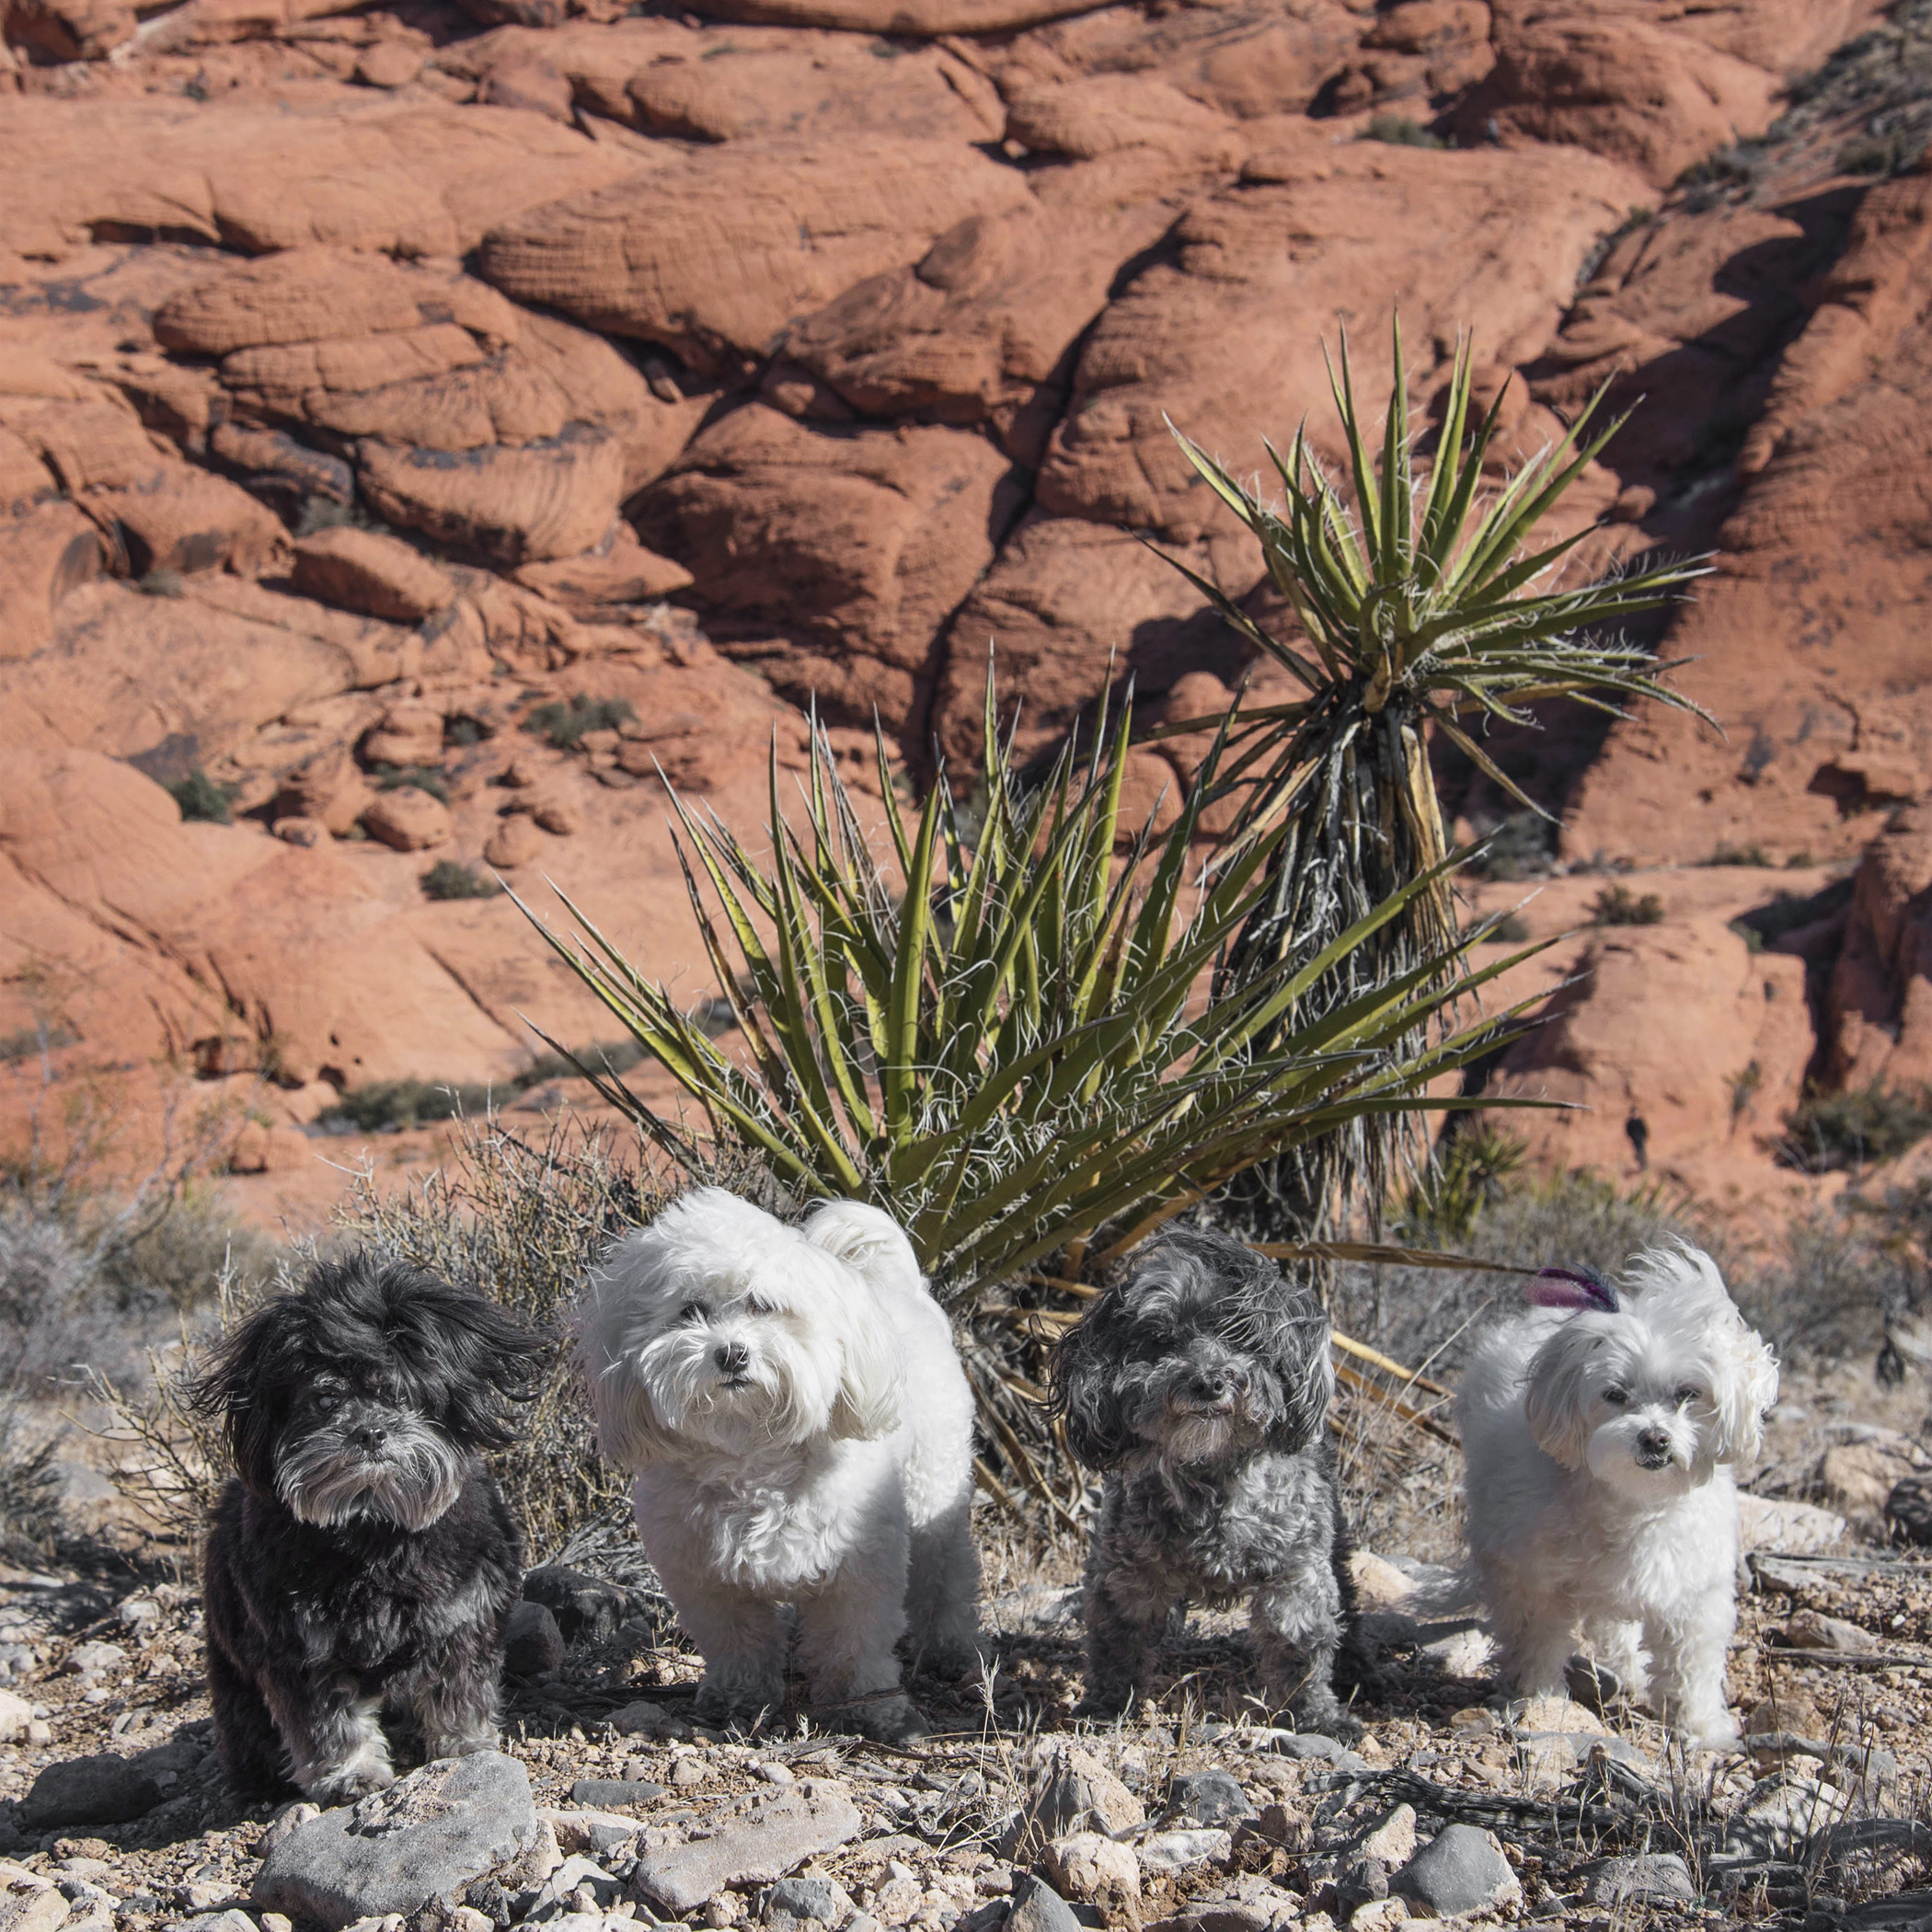  Could you have picked a windier spot, Mom? Again, so professional! If we’re not careful we’re going to blow off the side of this mountain at Red Rock Canyon! 